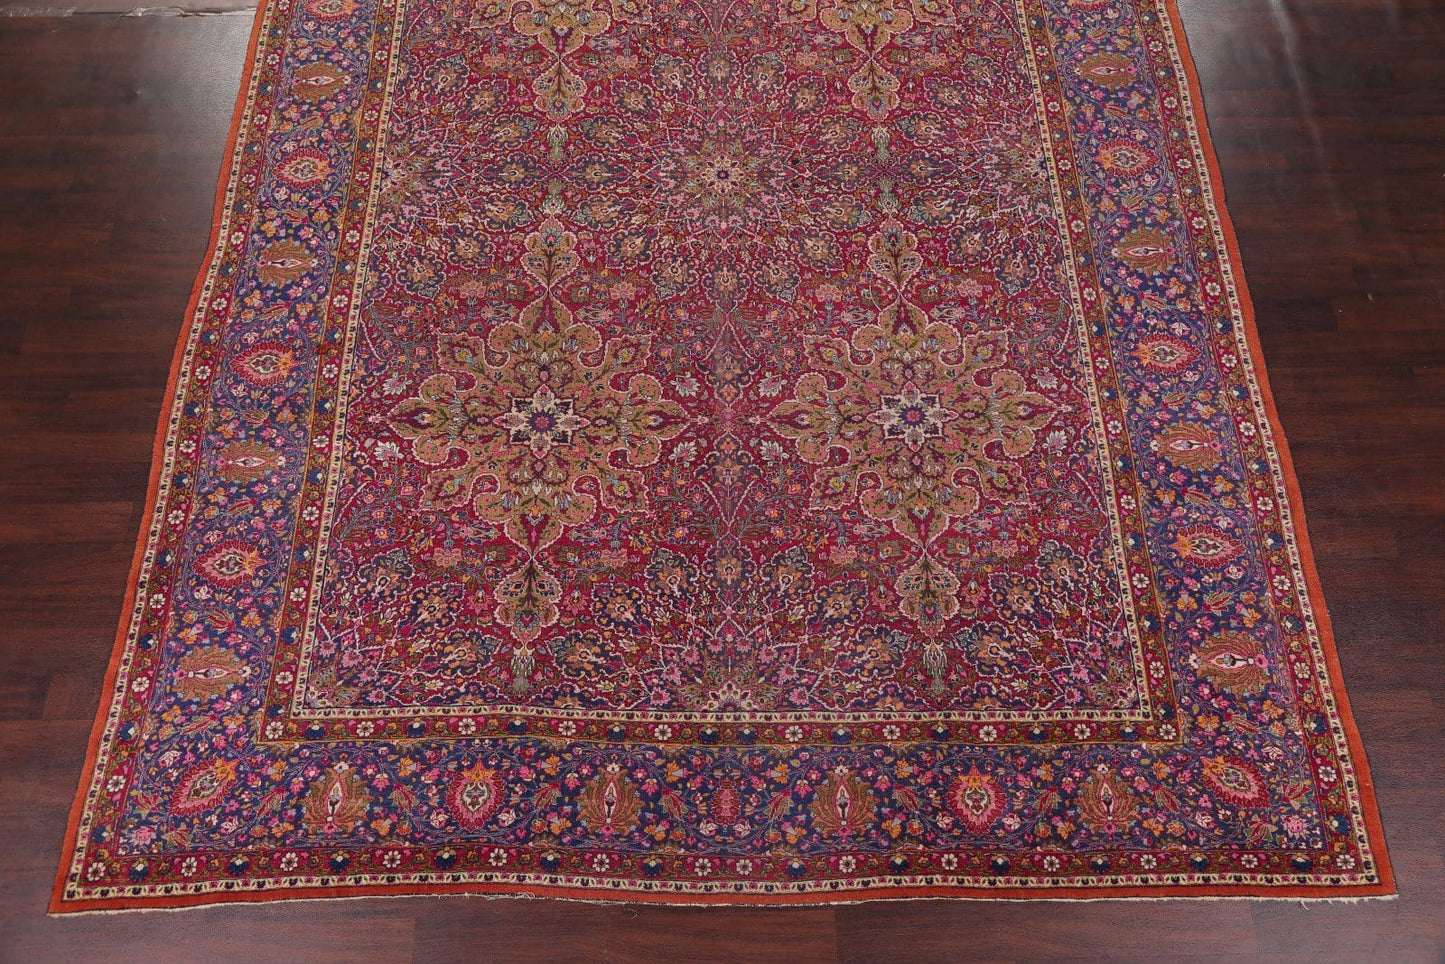 All-Over Floral 11x16 Mashad Persian Area Rug